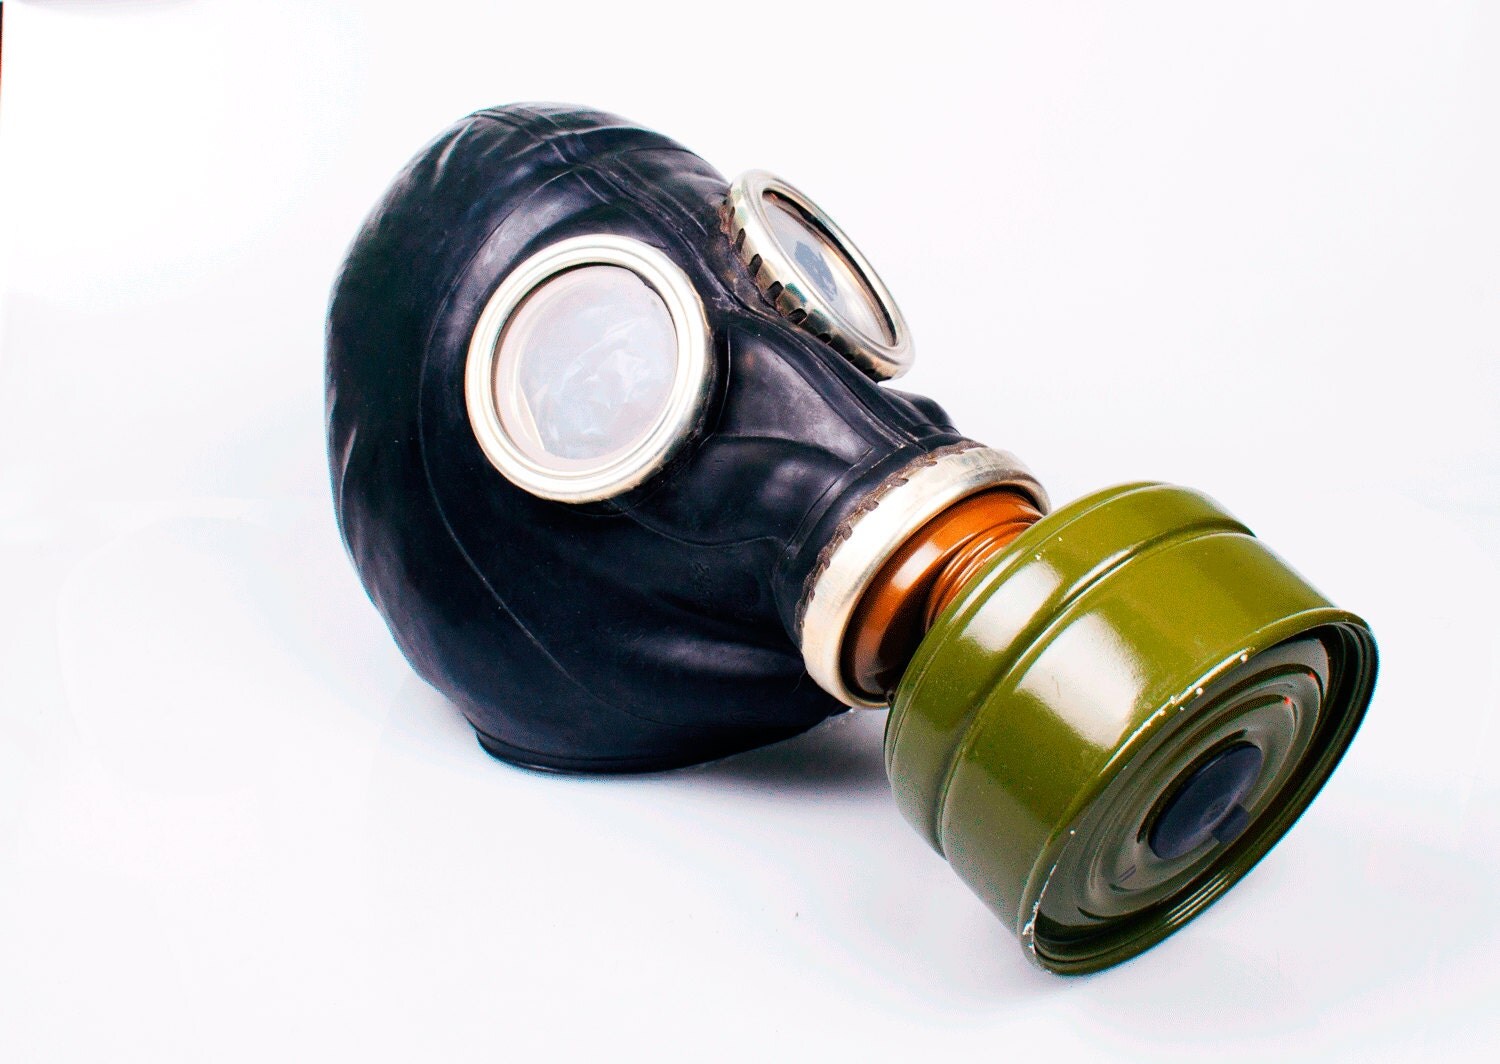 white and black gas mask